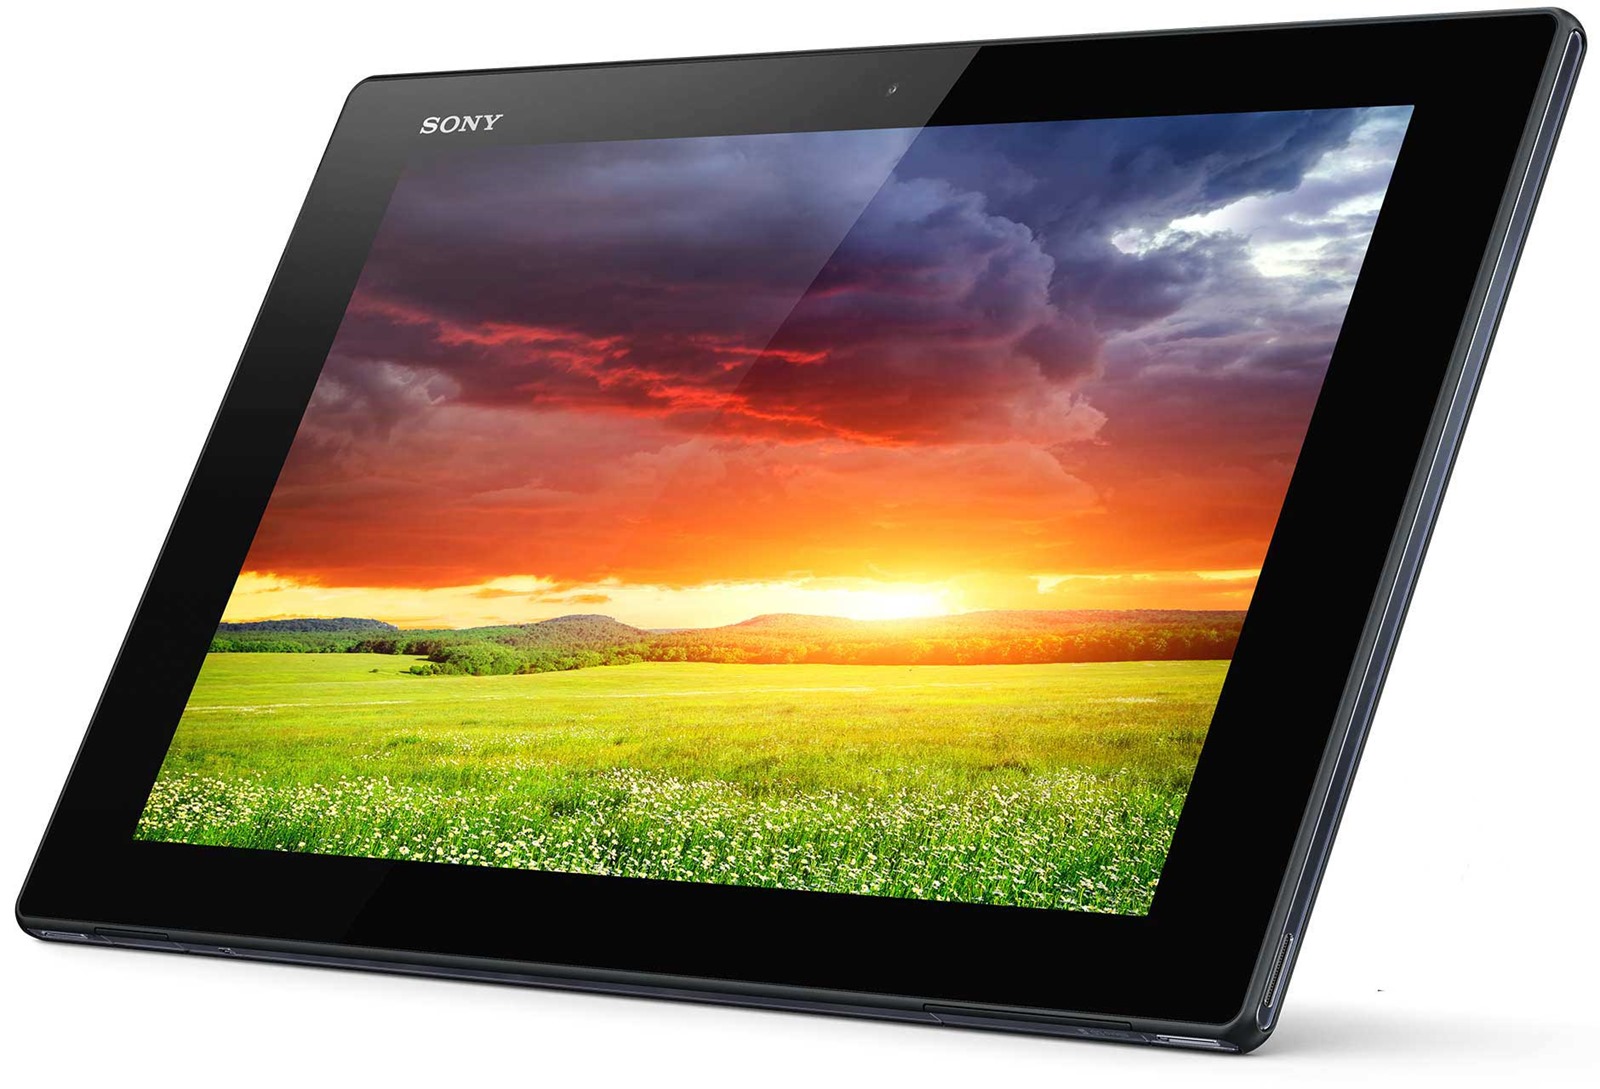 Sony Shows Off its Flagship Xperia Tablet Z Priced at $499